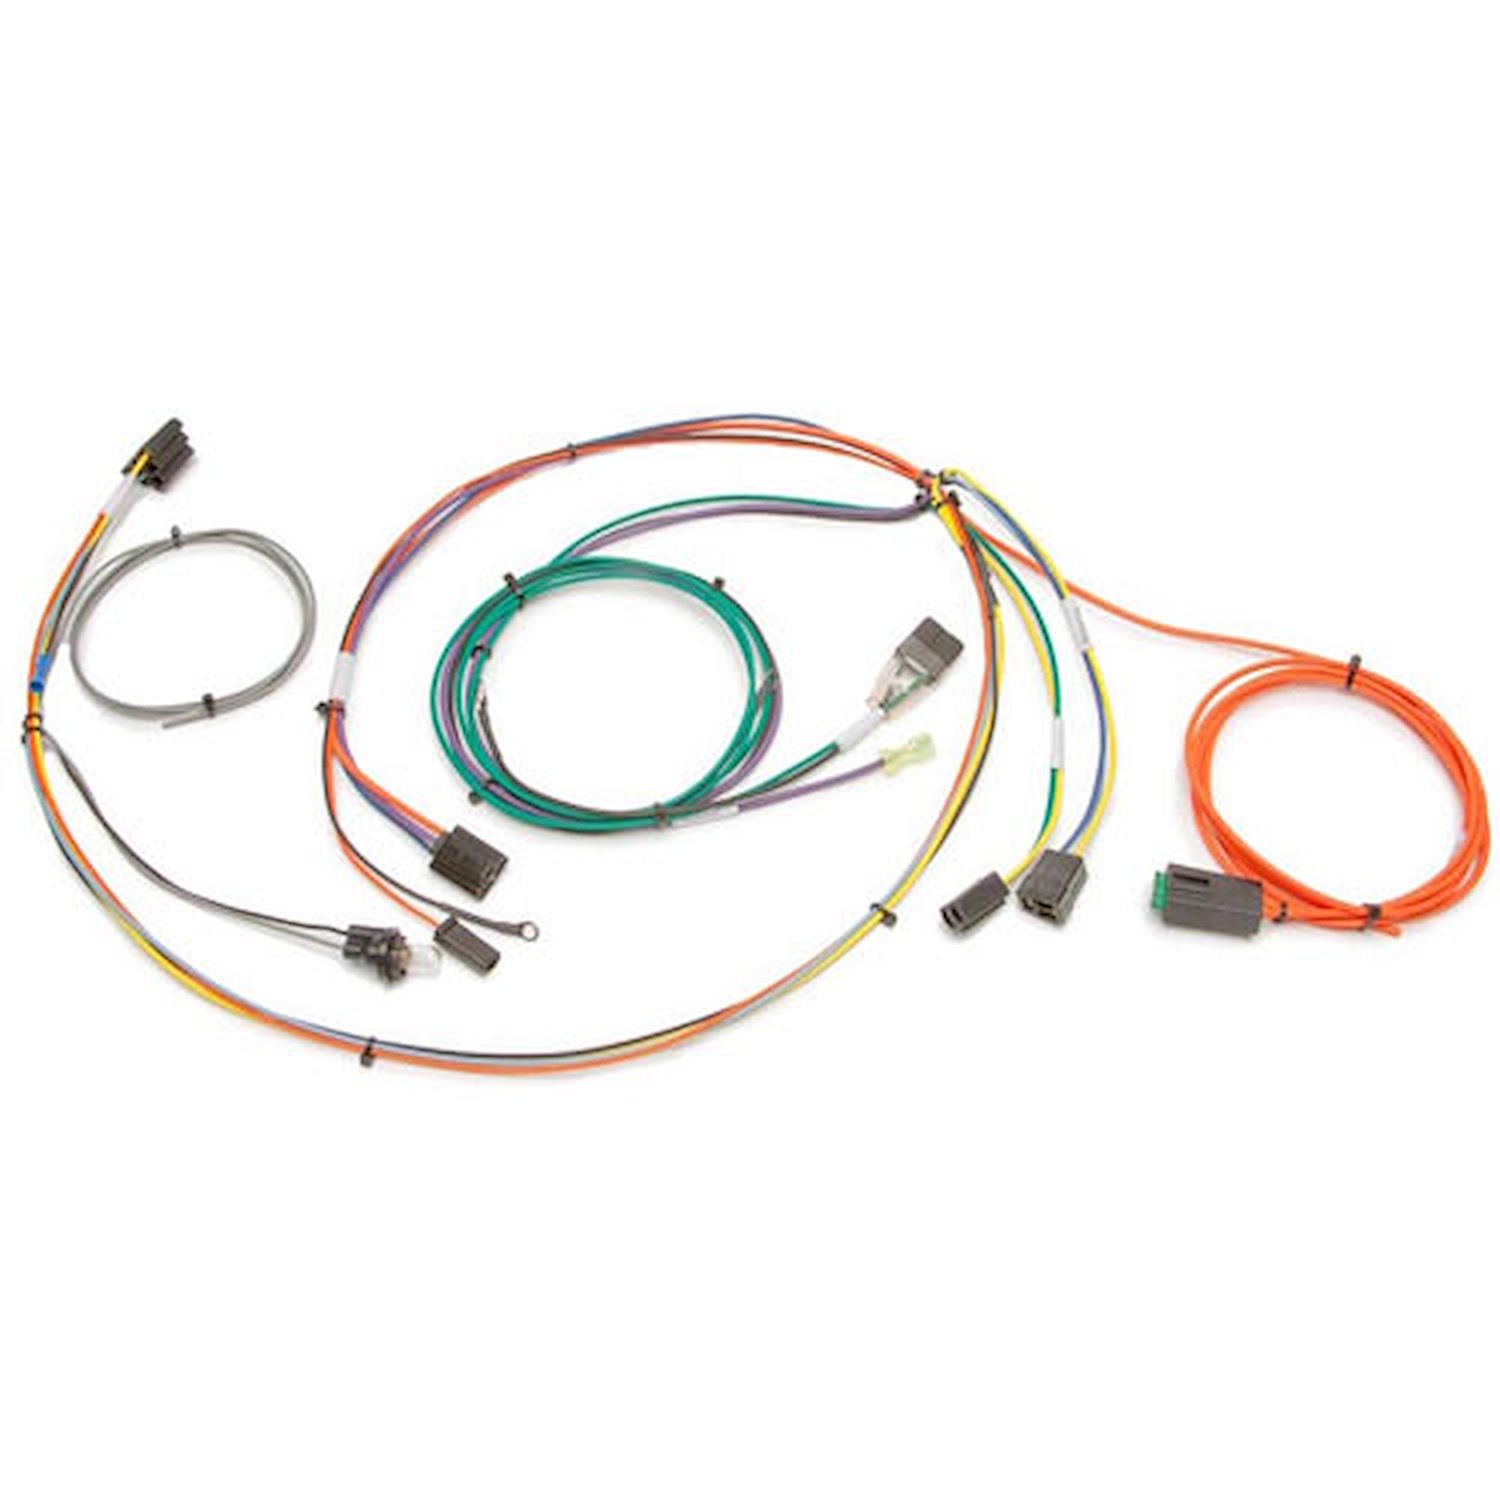 A/C Wiring Harness 1967-72 Chevy/GMC Truck